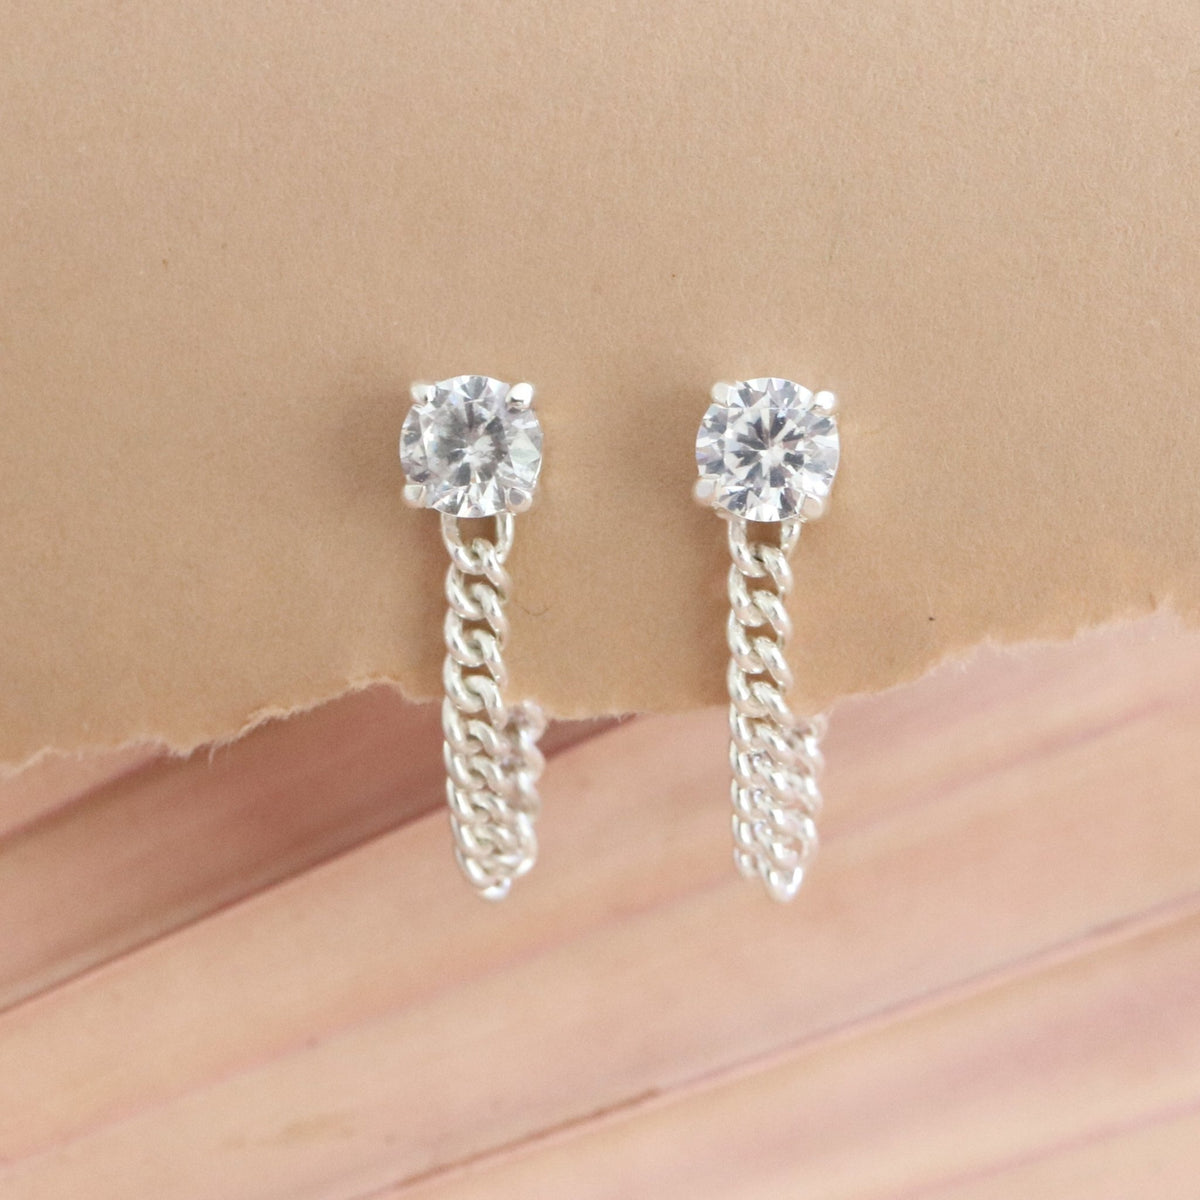 LOVE CABLE LINK CHAIN EARRINGS - CUBIC ZIRCONIA &amp; SILVER - SO PRETTY CARA COTTER